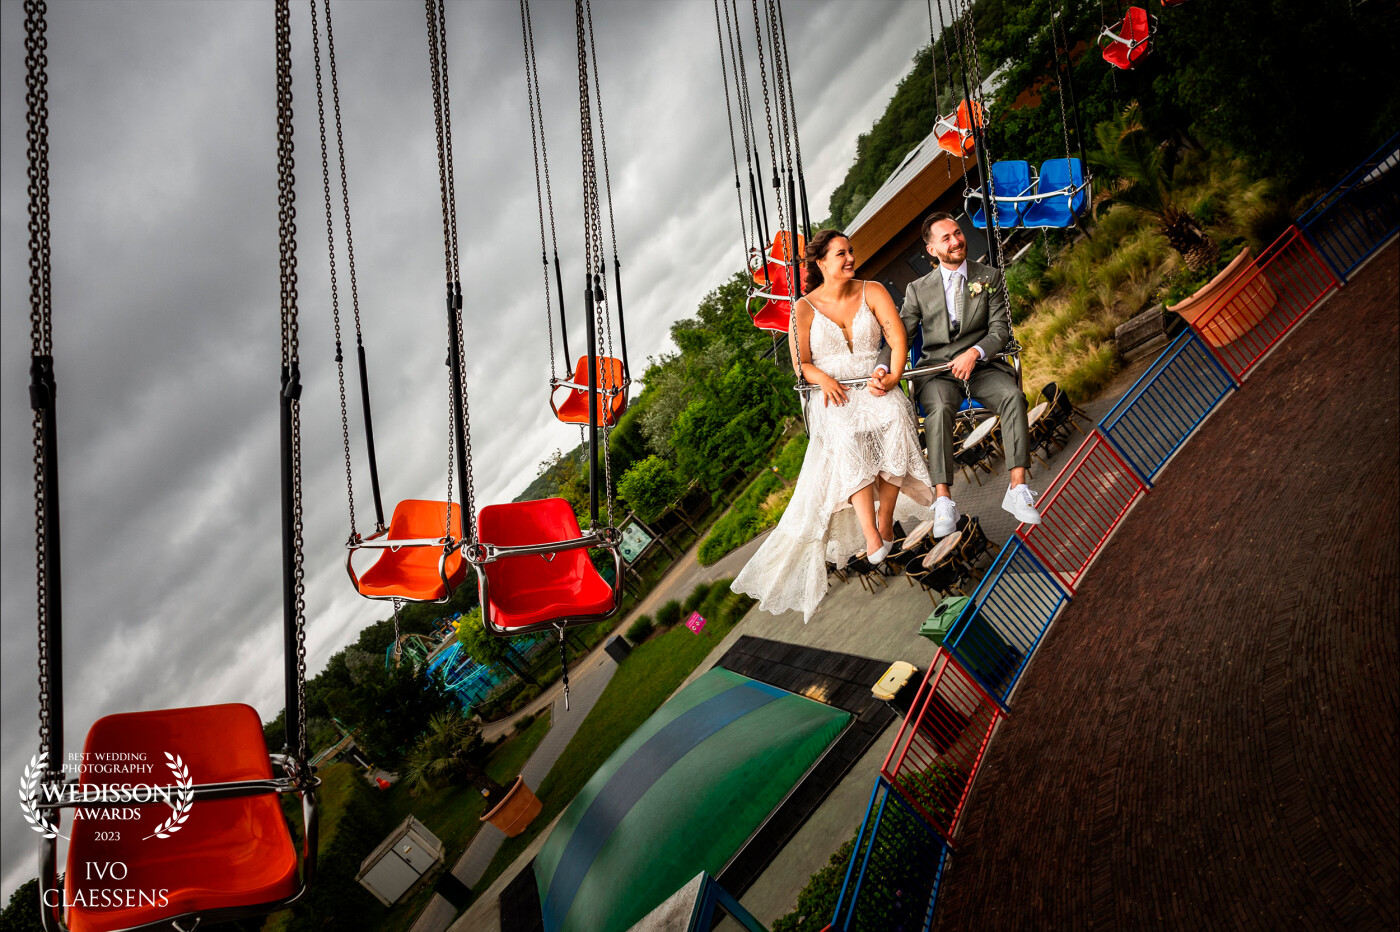 Two months ahead of the wedding, the bride contacted me via mail with a special request: a photograph while riding a carousel. Without hesitation, I agreed to the idea. And now, here is the outcome of our endeavor!